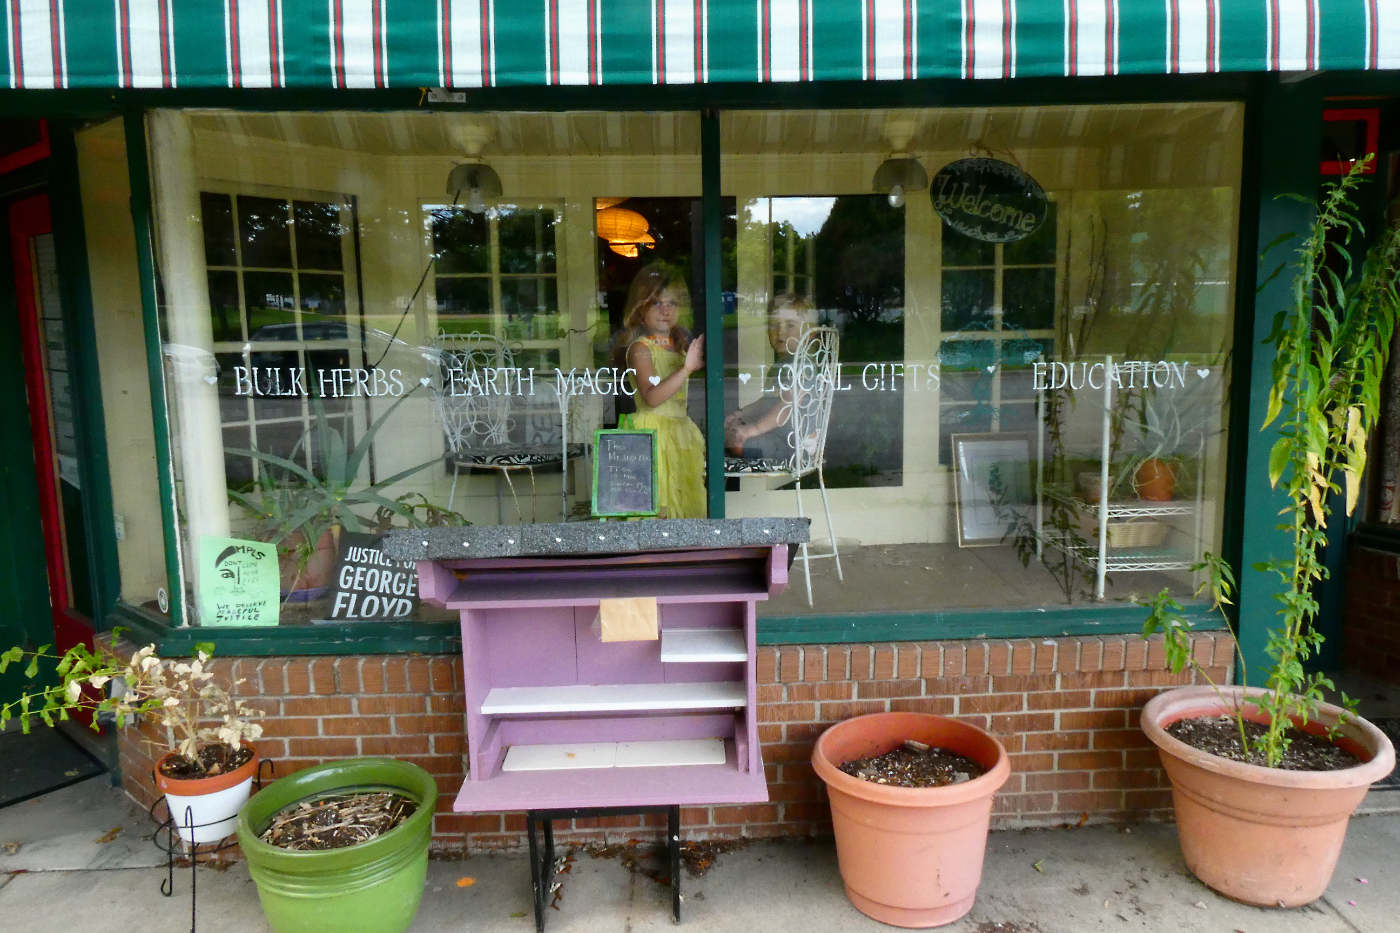 storefront window with two children inside display area with shelves and flower pots on sidewalk in front and striped canvas awning overhead